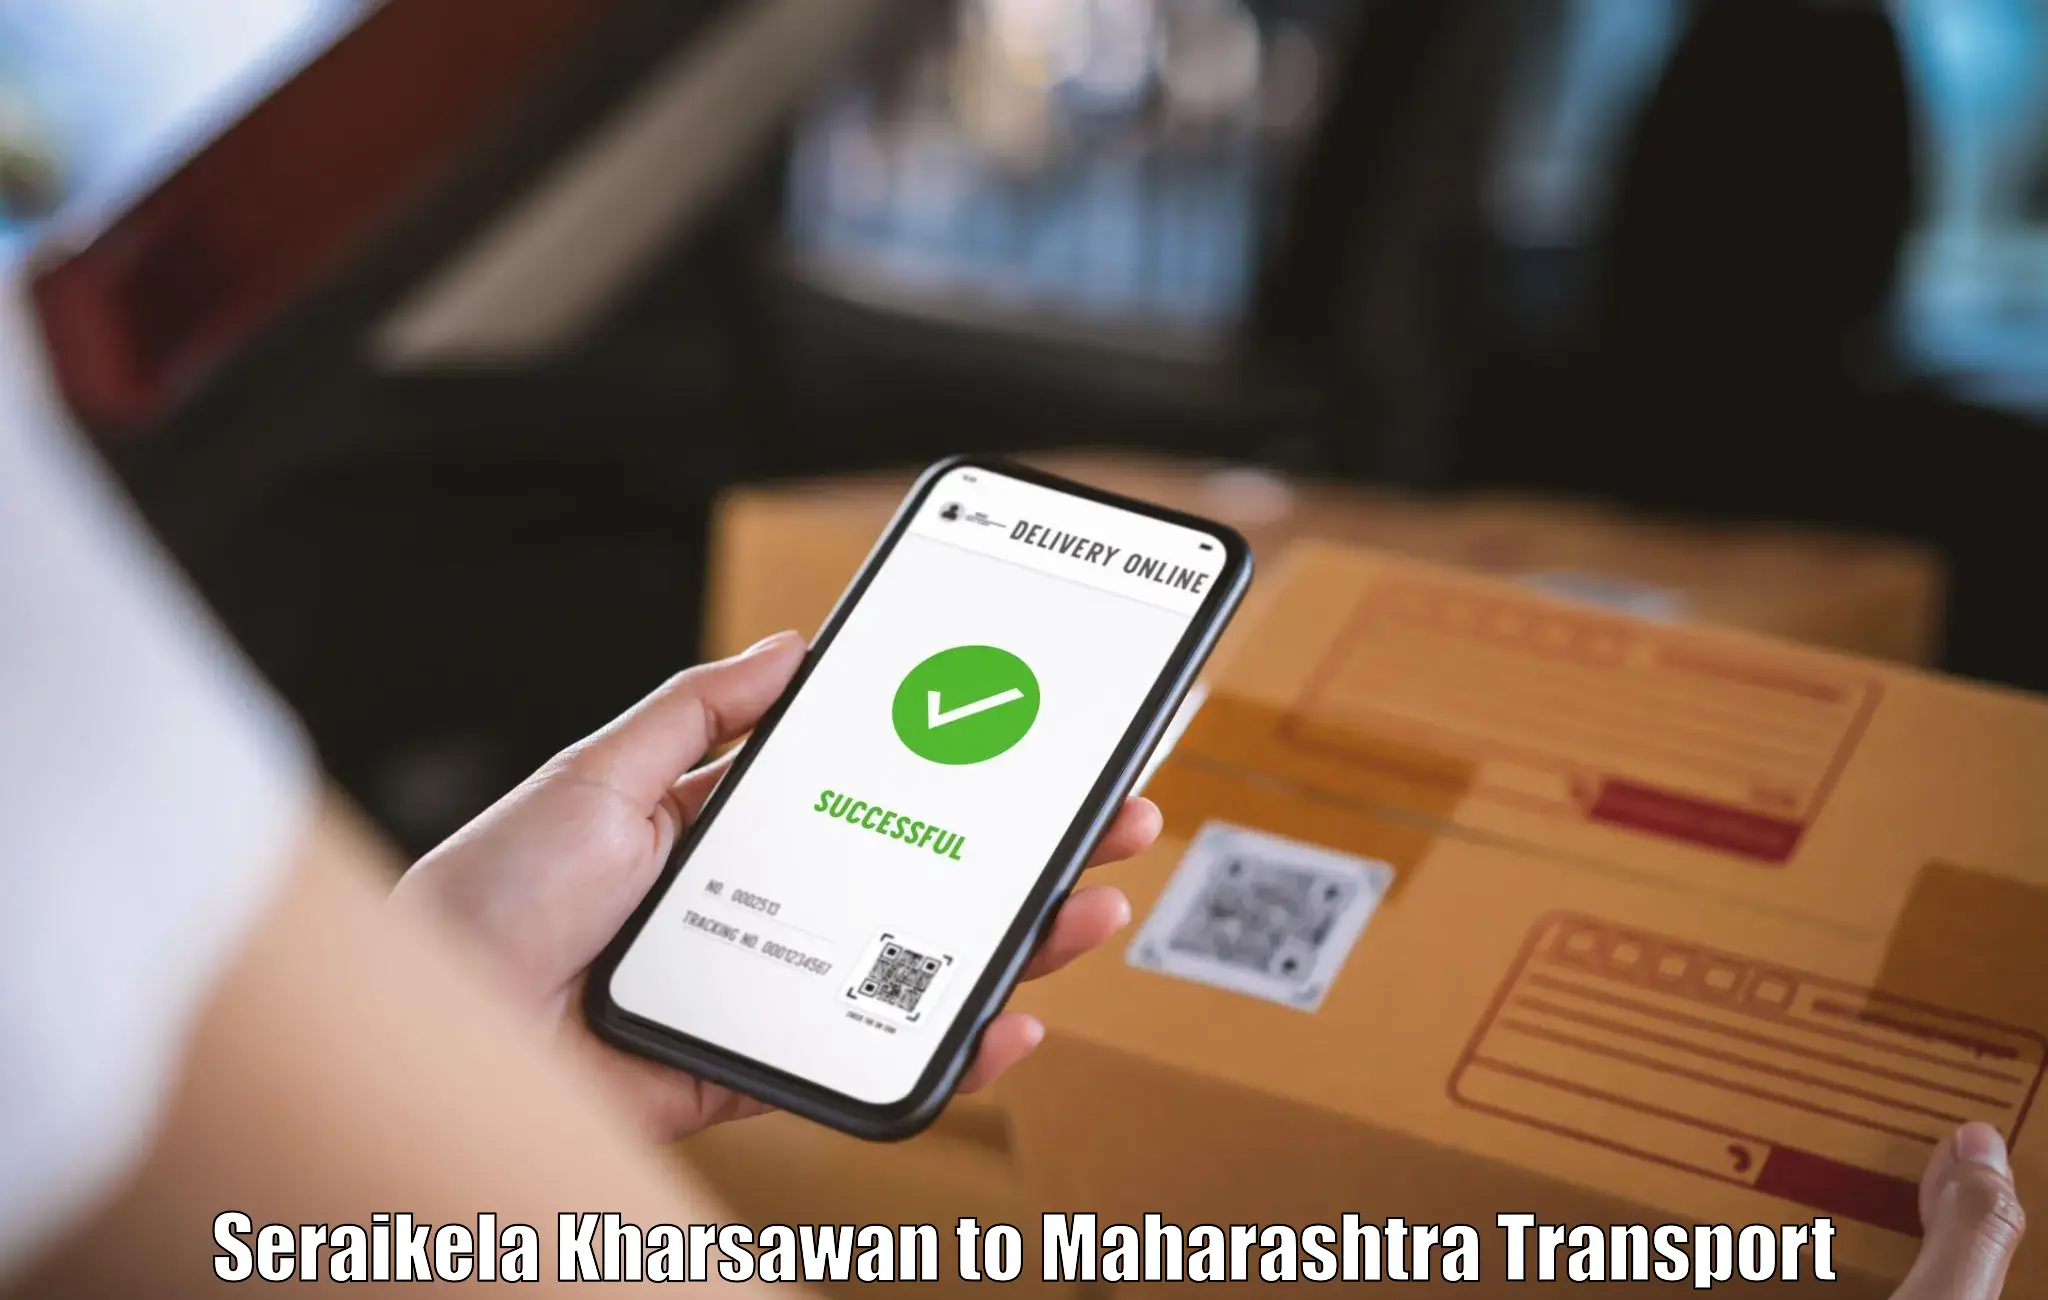 Package delivery services Seraikela Kharsawan to Lonar